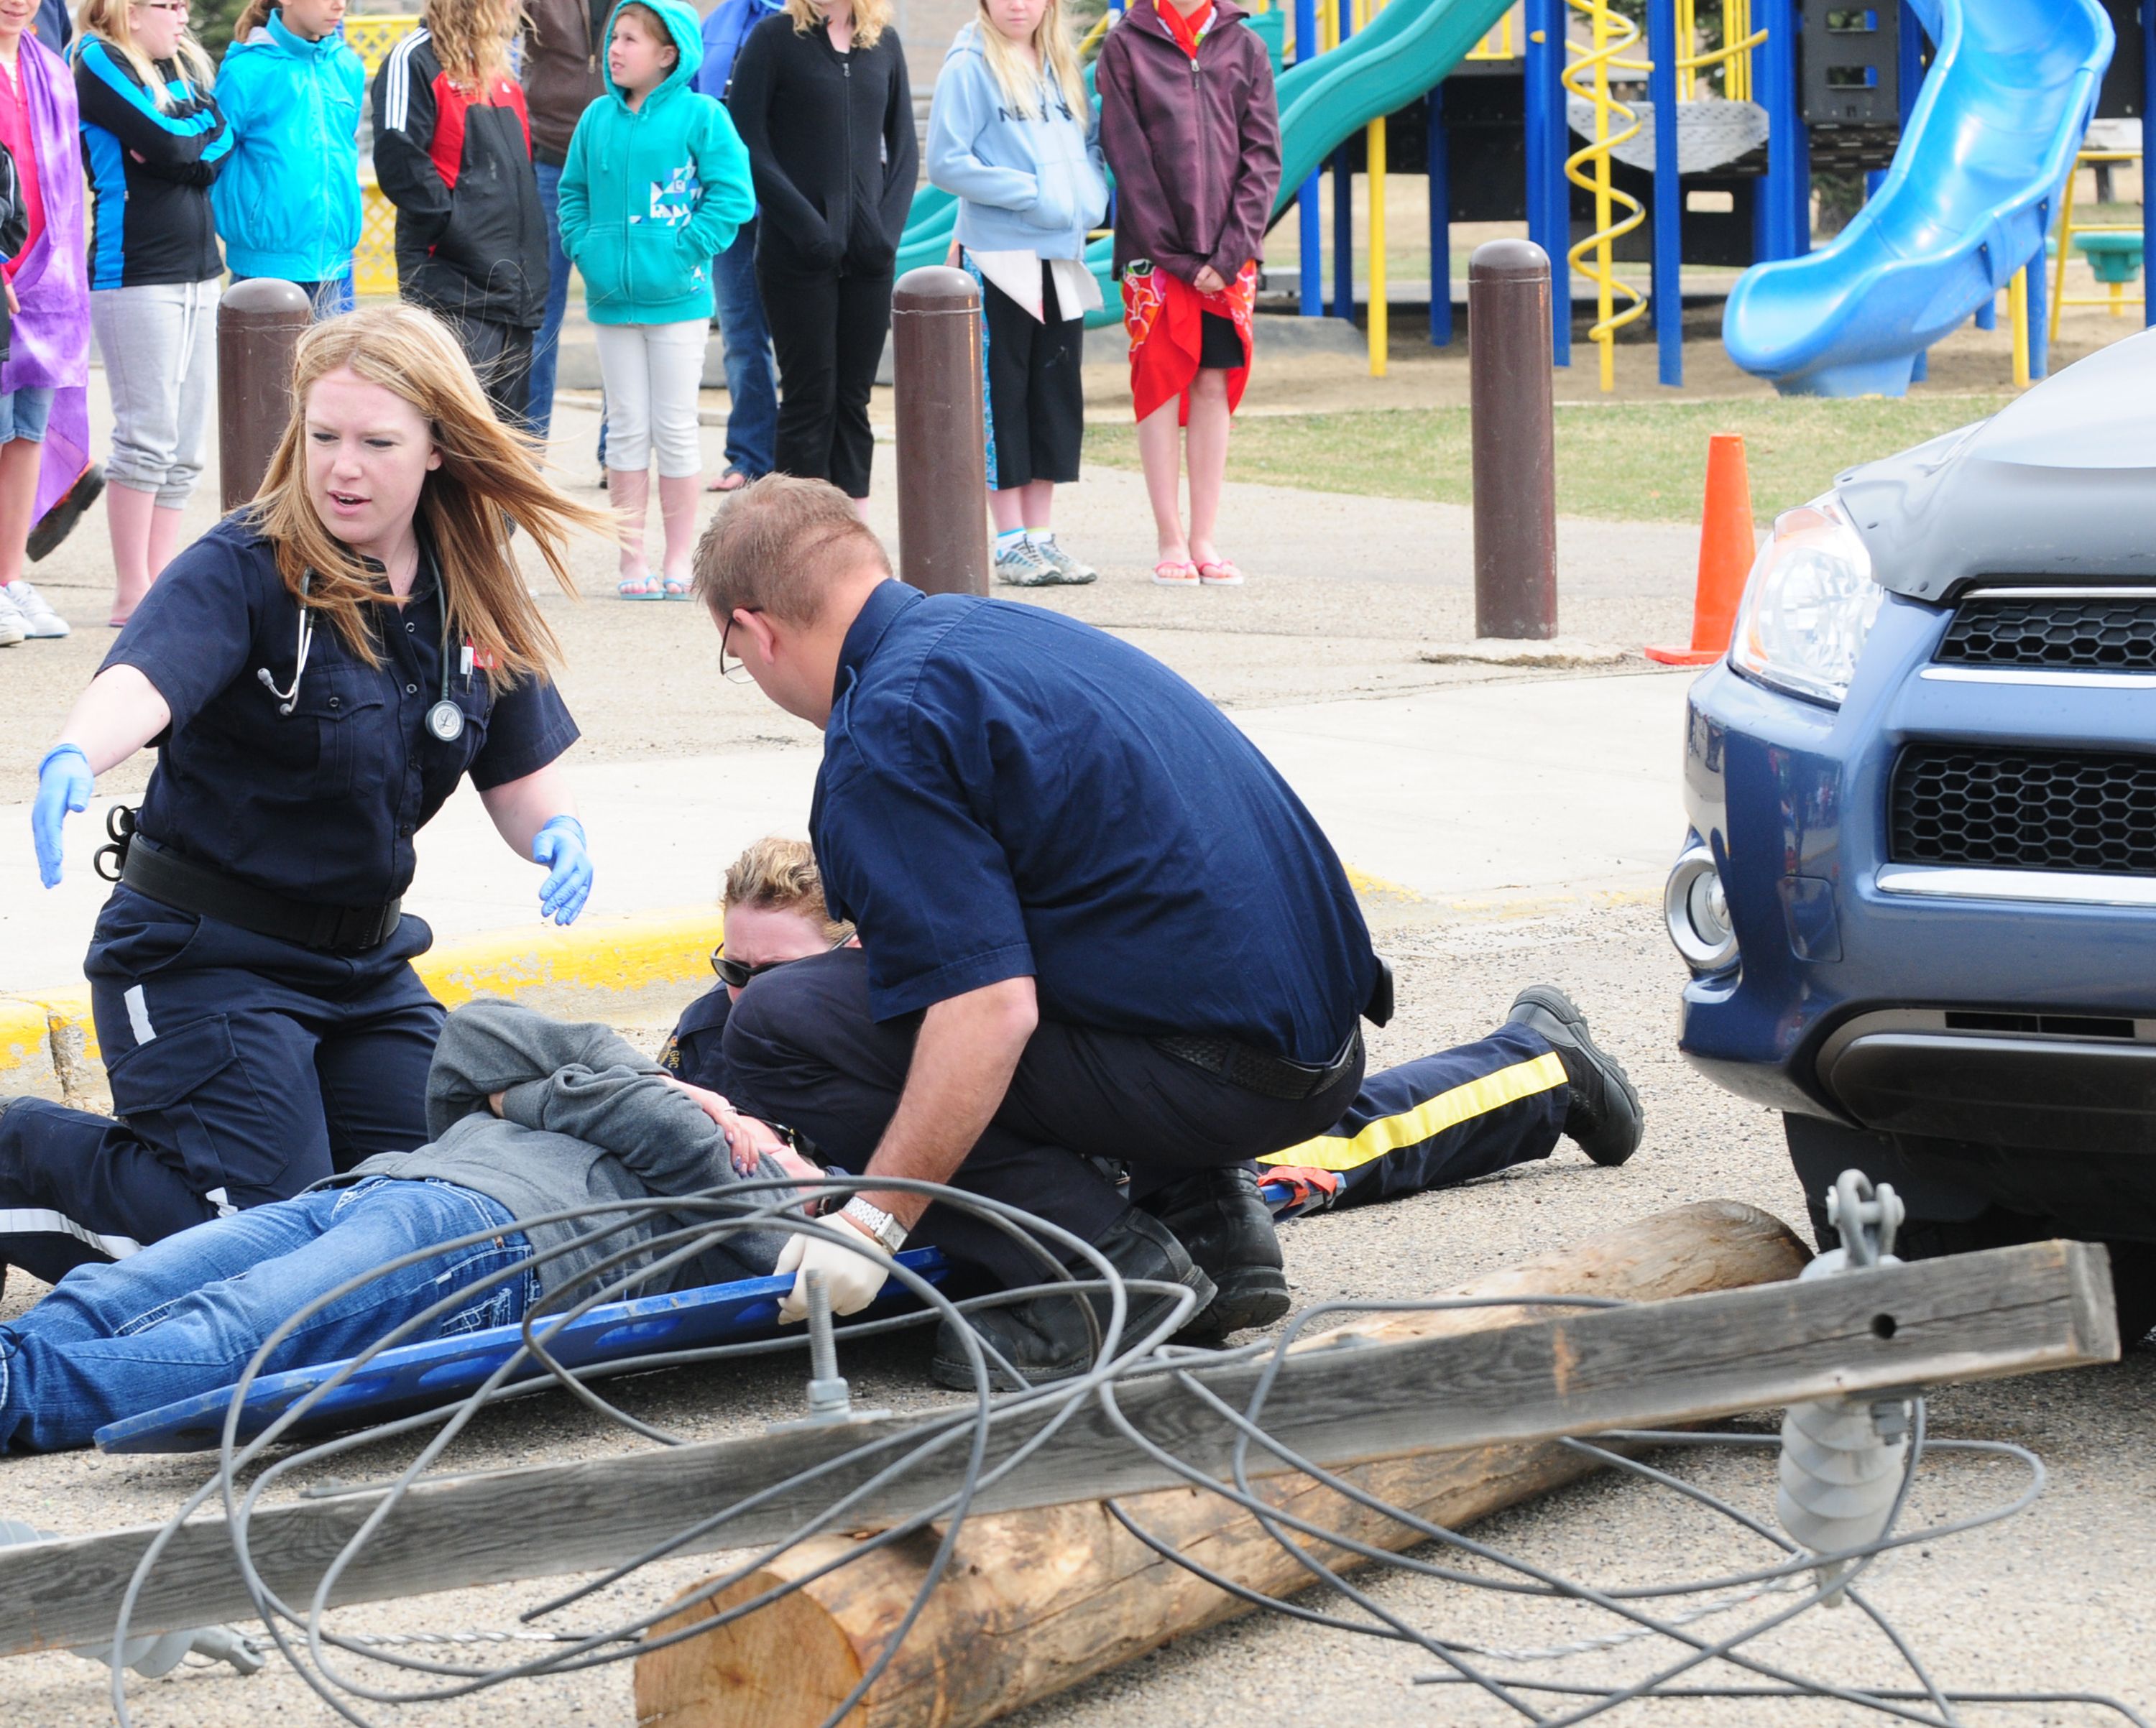 ACTING- Lacey Wutzke lays on a stretcher while a crew from the City’s emergency services looks after her during a reenactment of an accident at Holy Family School for Grade 5 students.